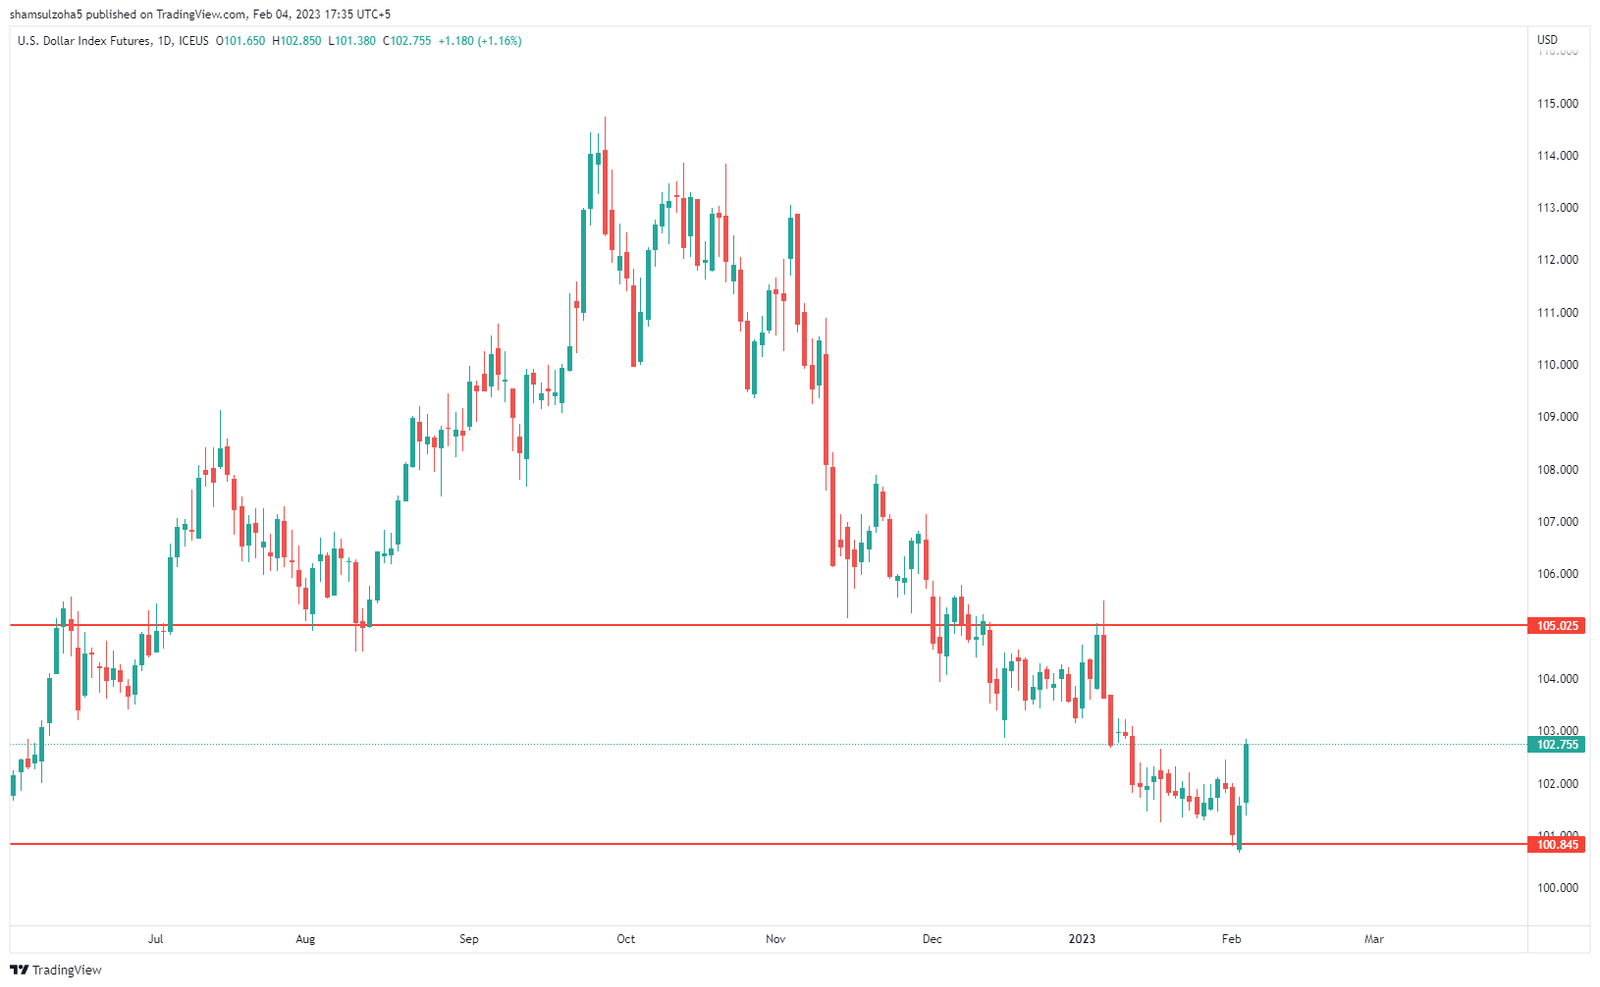 US Dollar Index (DX) Futures Technical Analysis – Upward Trend on Higher Rate Hike Expectations